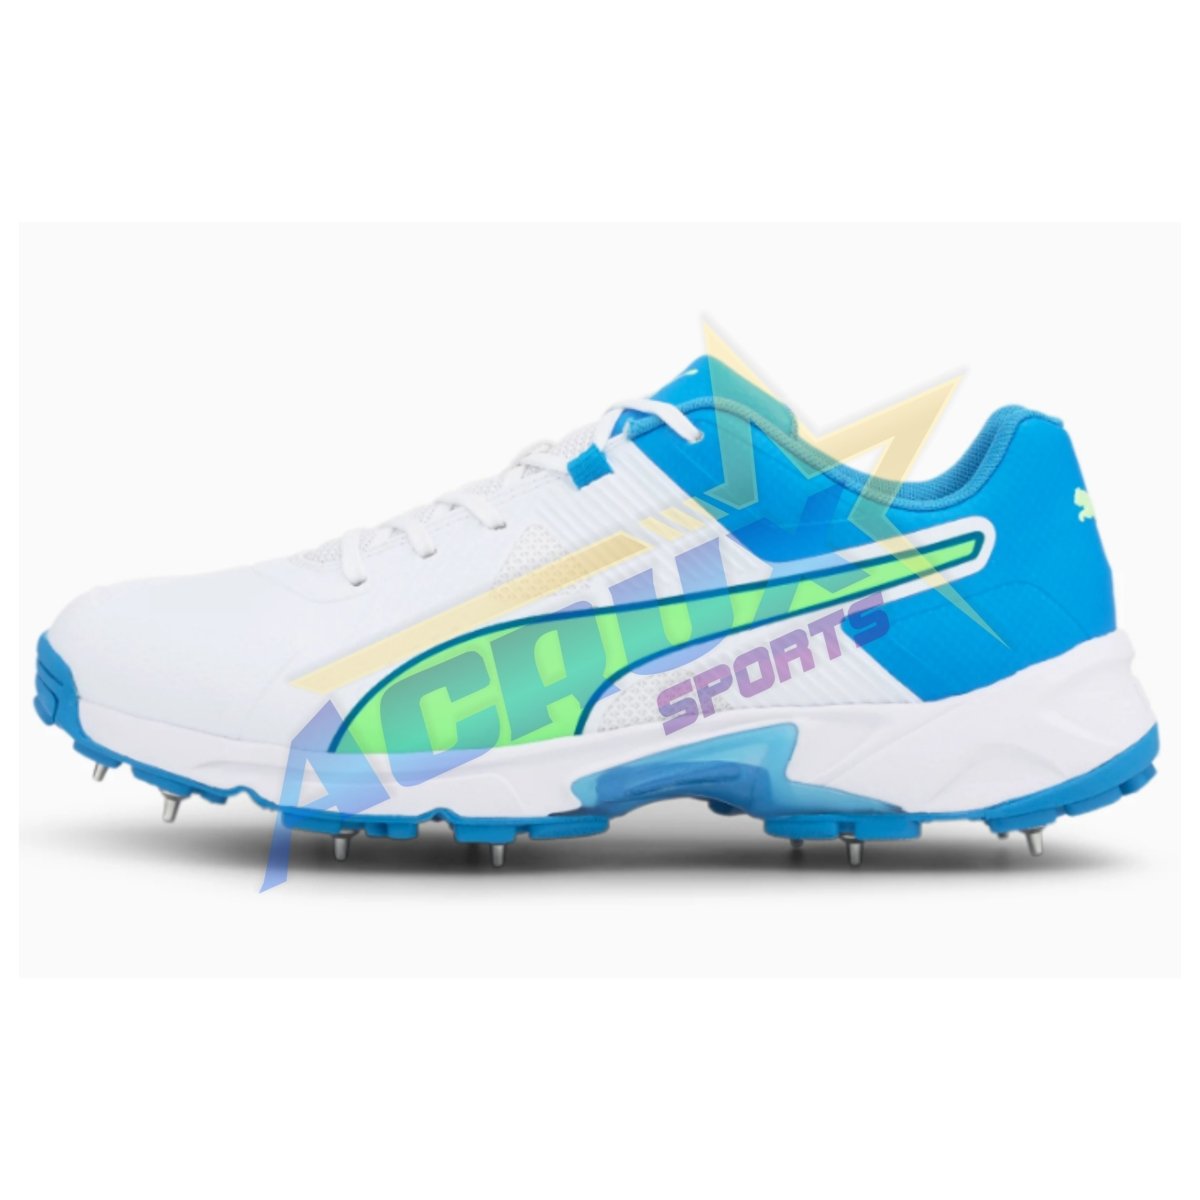 Puma One8 19.1 Cricket Shoes With Steel Spikes - White Nrgy Blue.